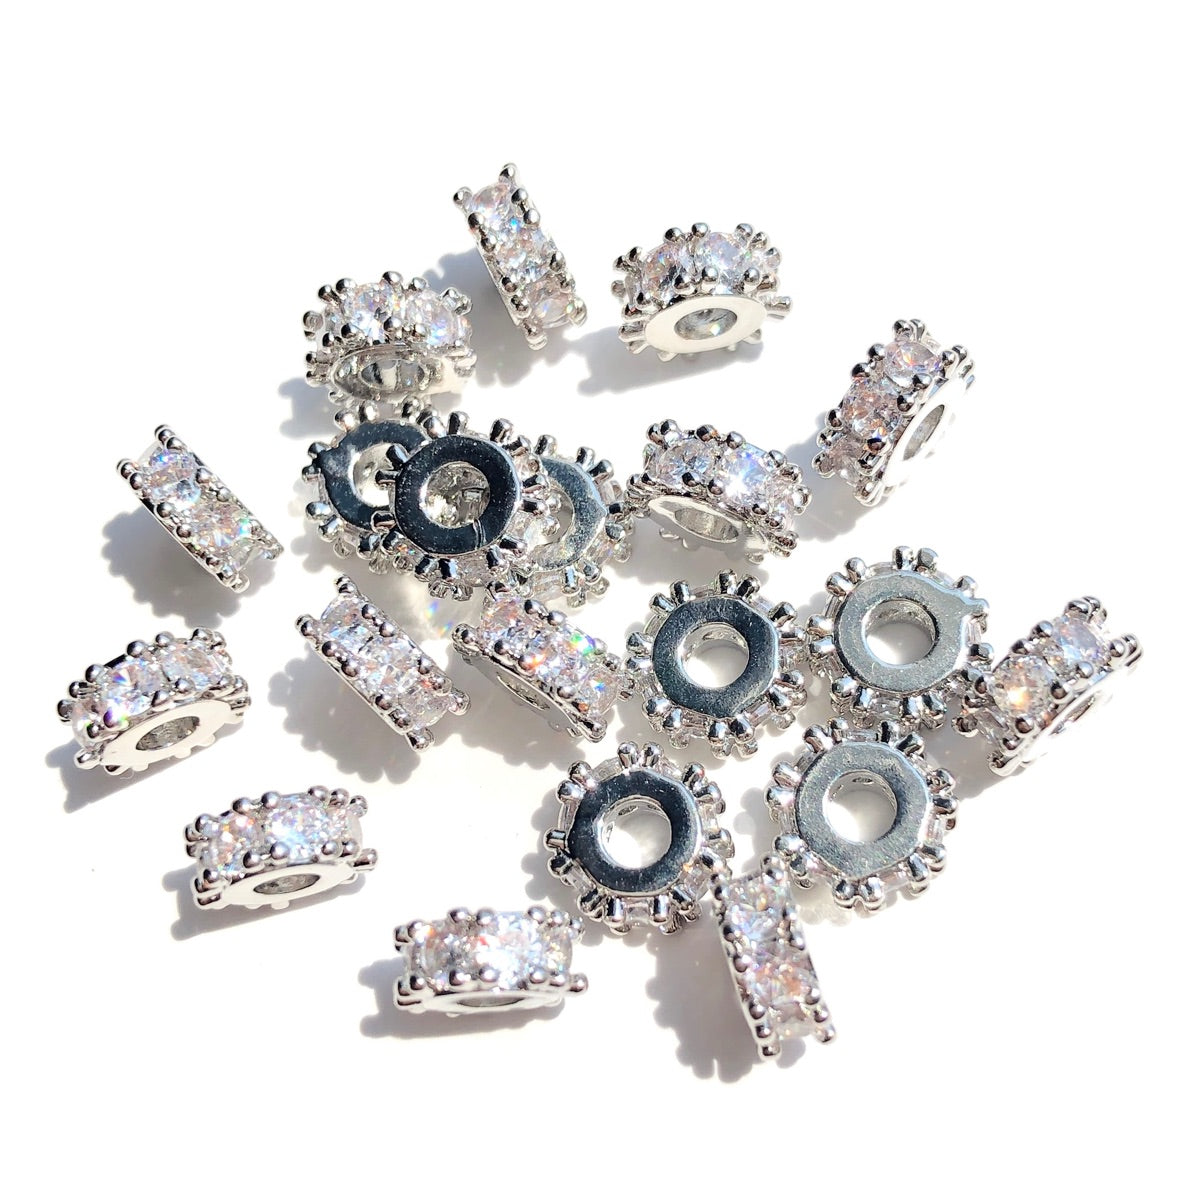 20-50pcs/lot 7.6mm CZ Paved Rondelle Wheel Spacers Silver CZ Paved Spacers New Spacers Arrivals Rondelle Beads Wholesale Charms Beads Beyond